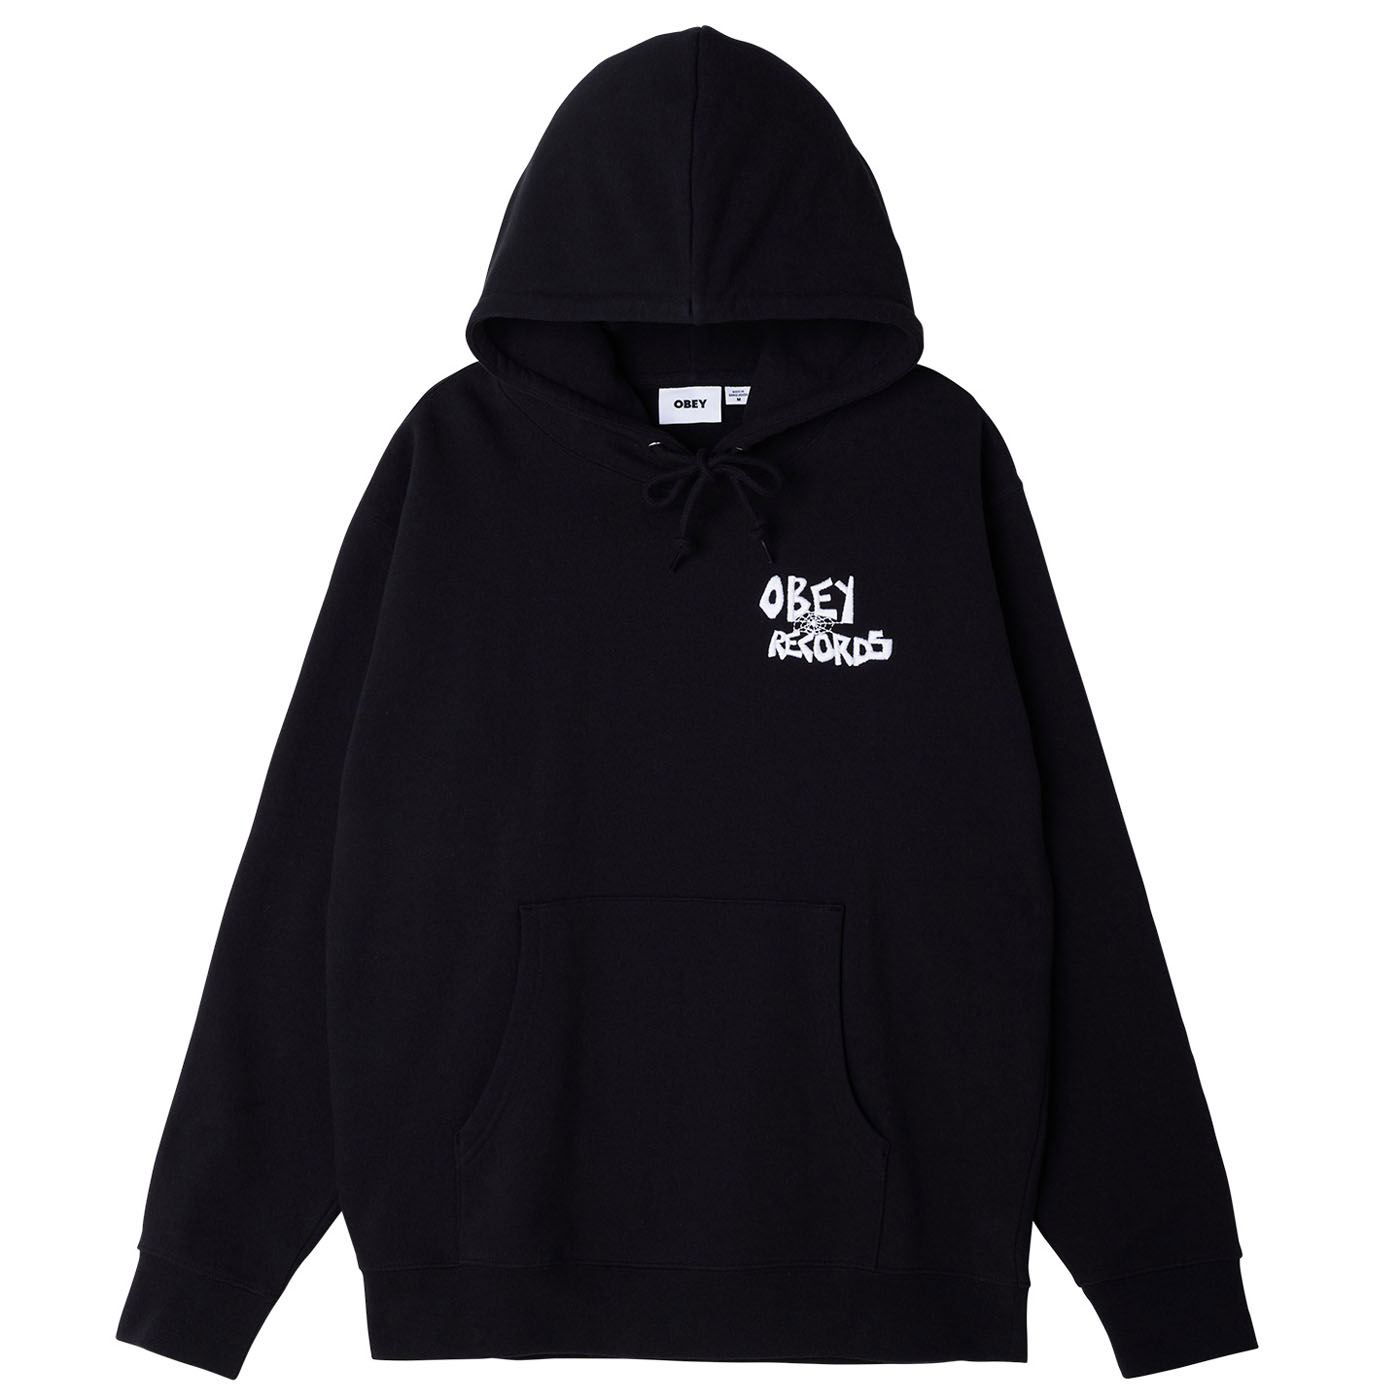 Obey Records Hood | Obey Clothing UK